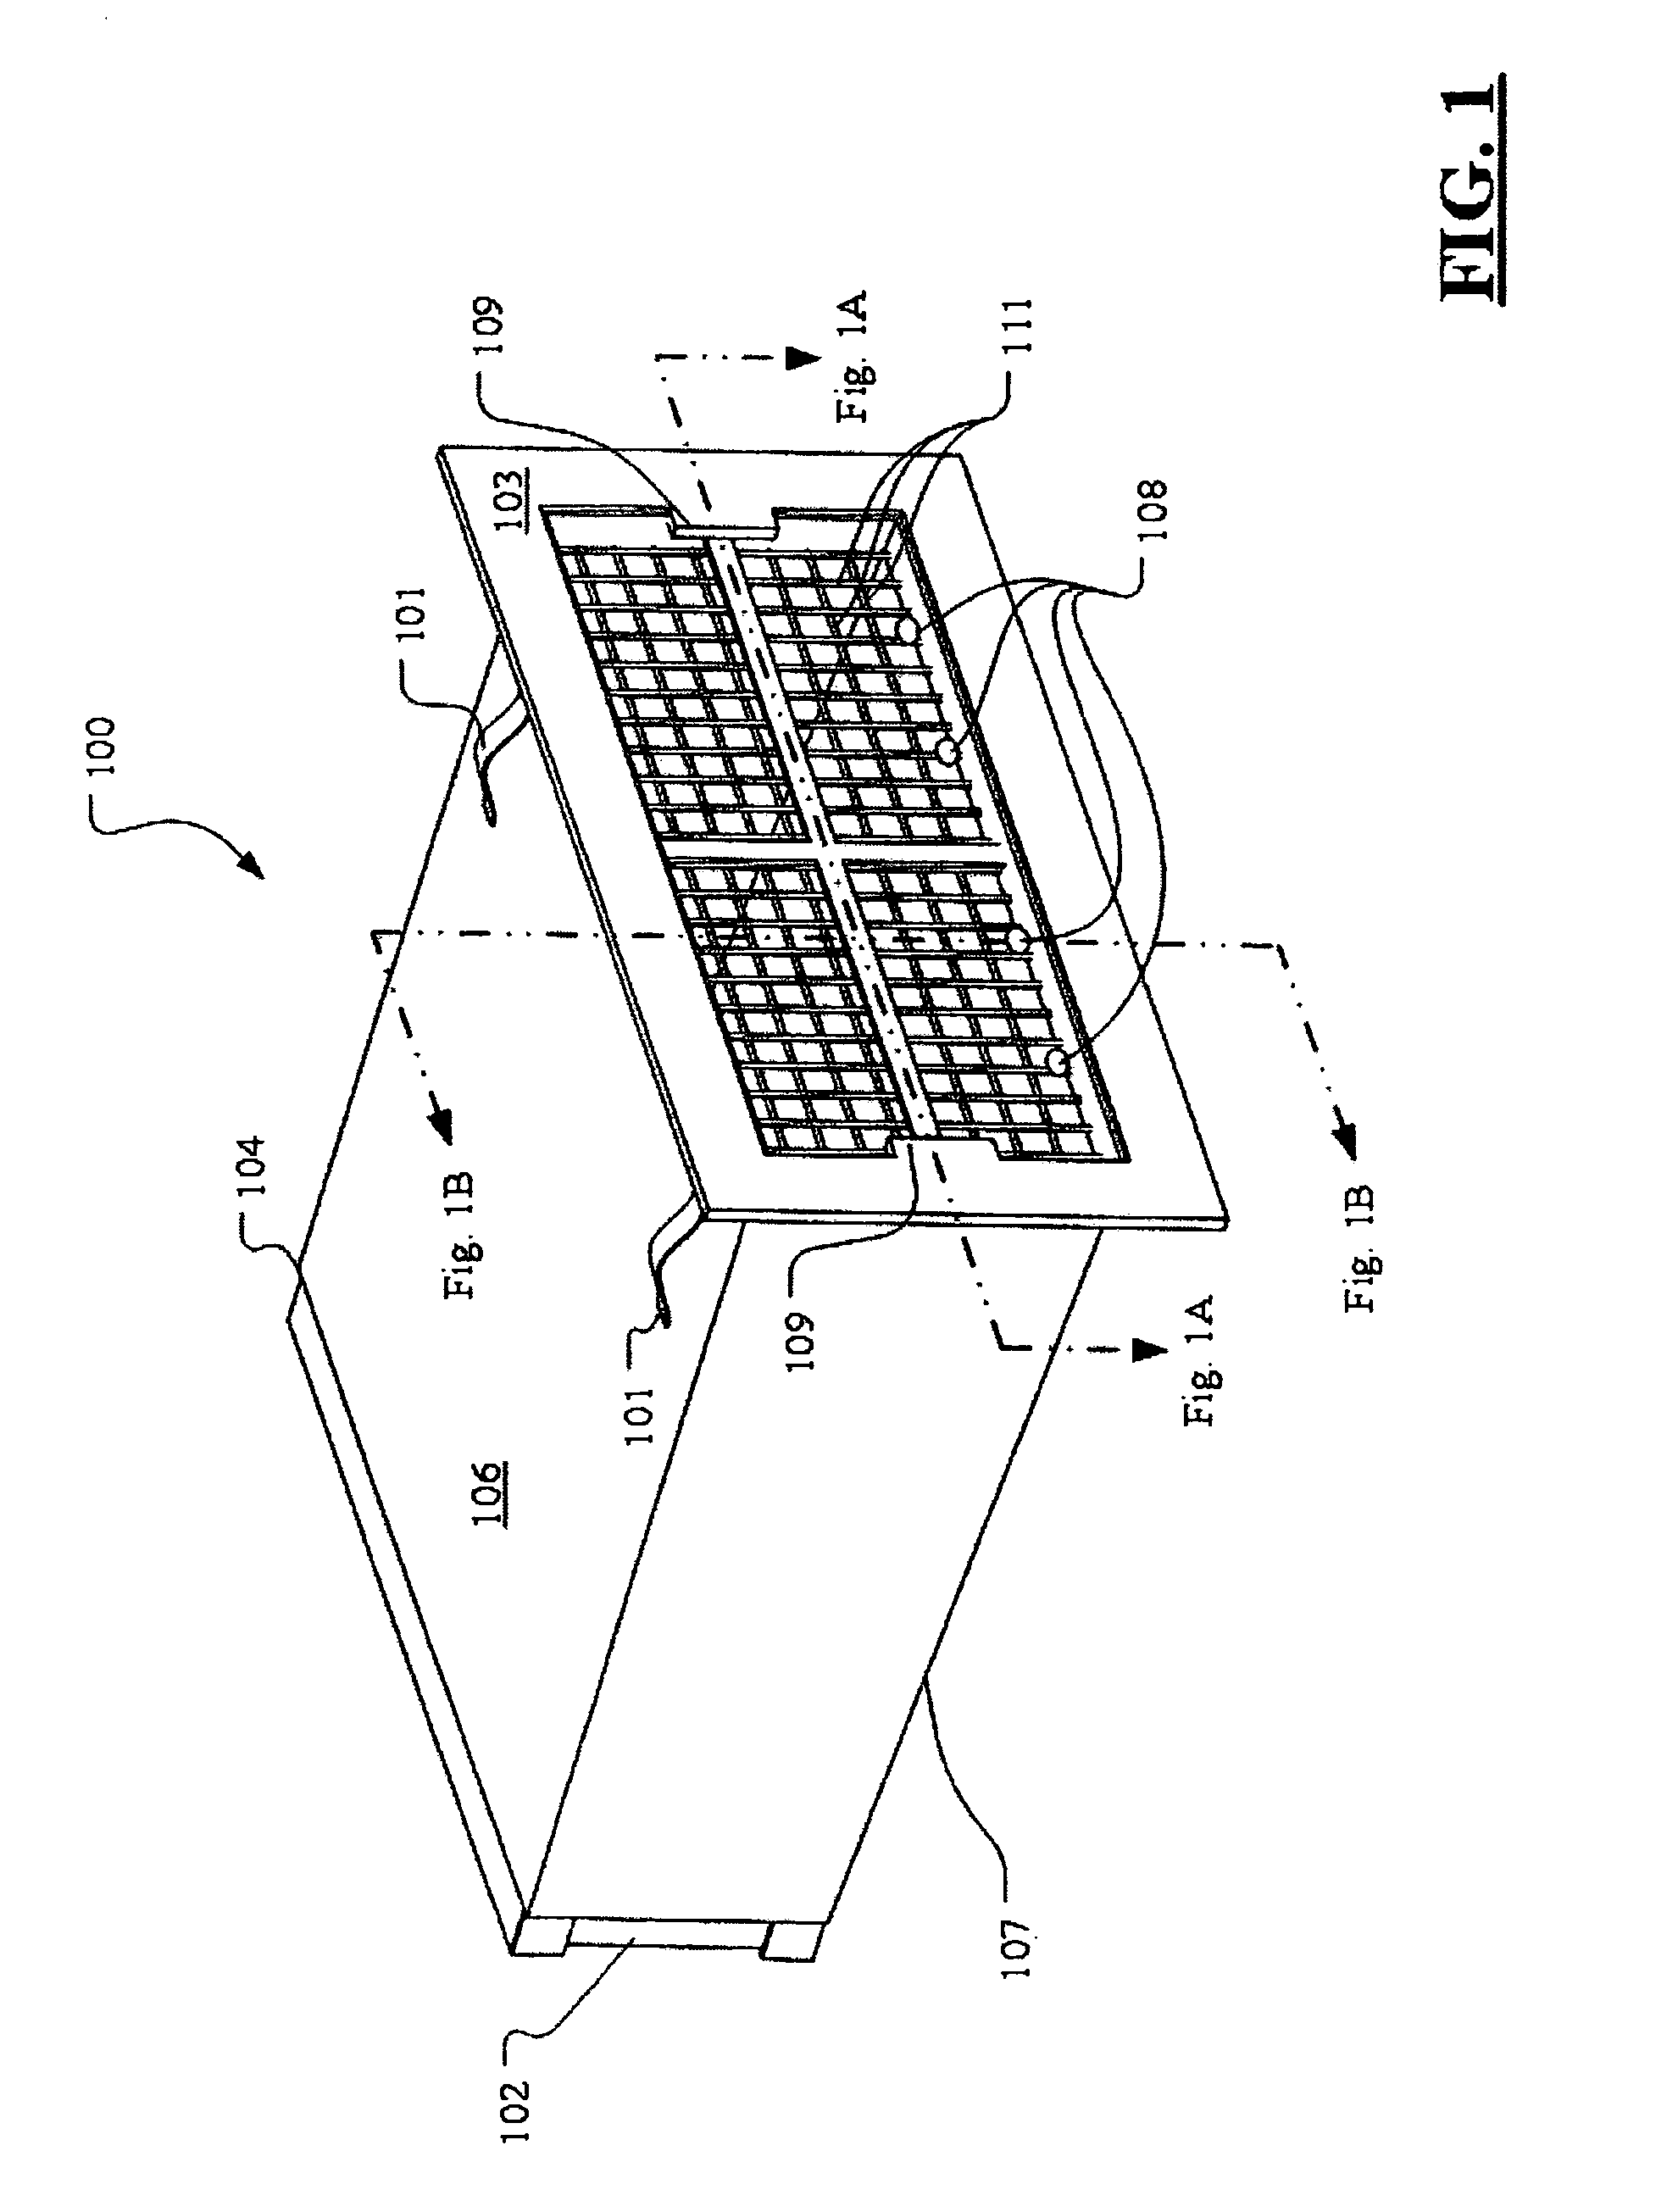 Removable vent having a filter for use in a building foundation